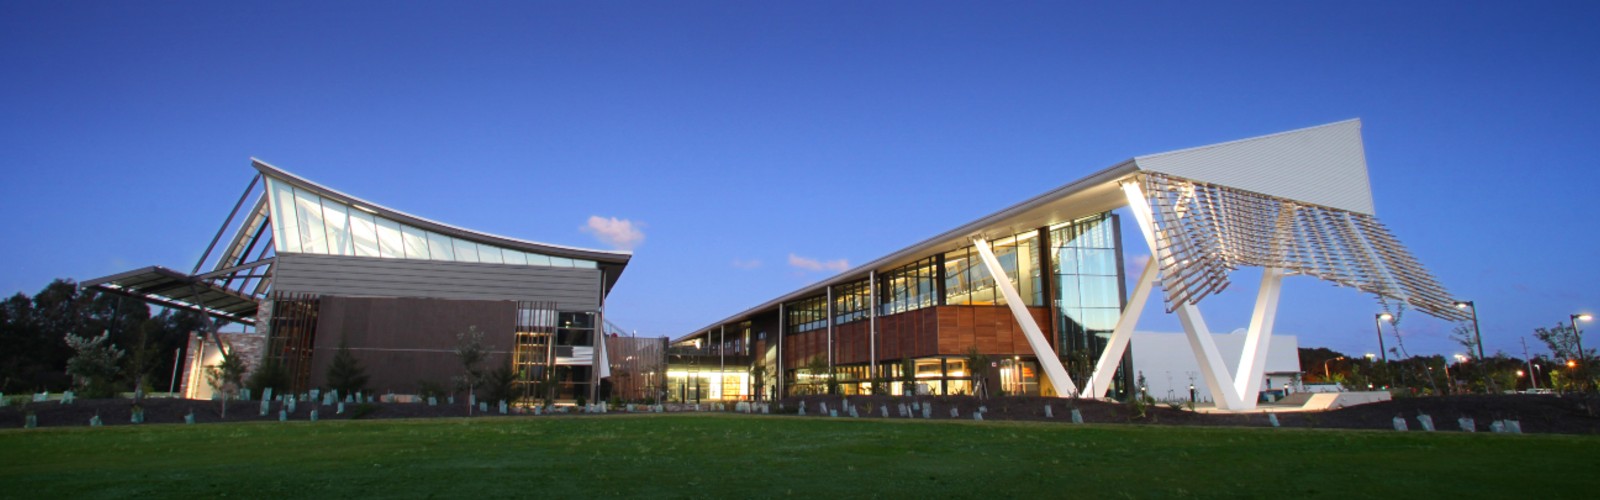 research services office uow